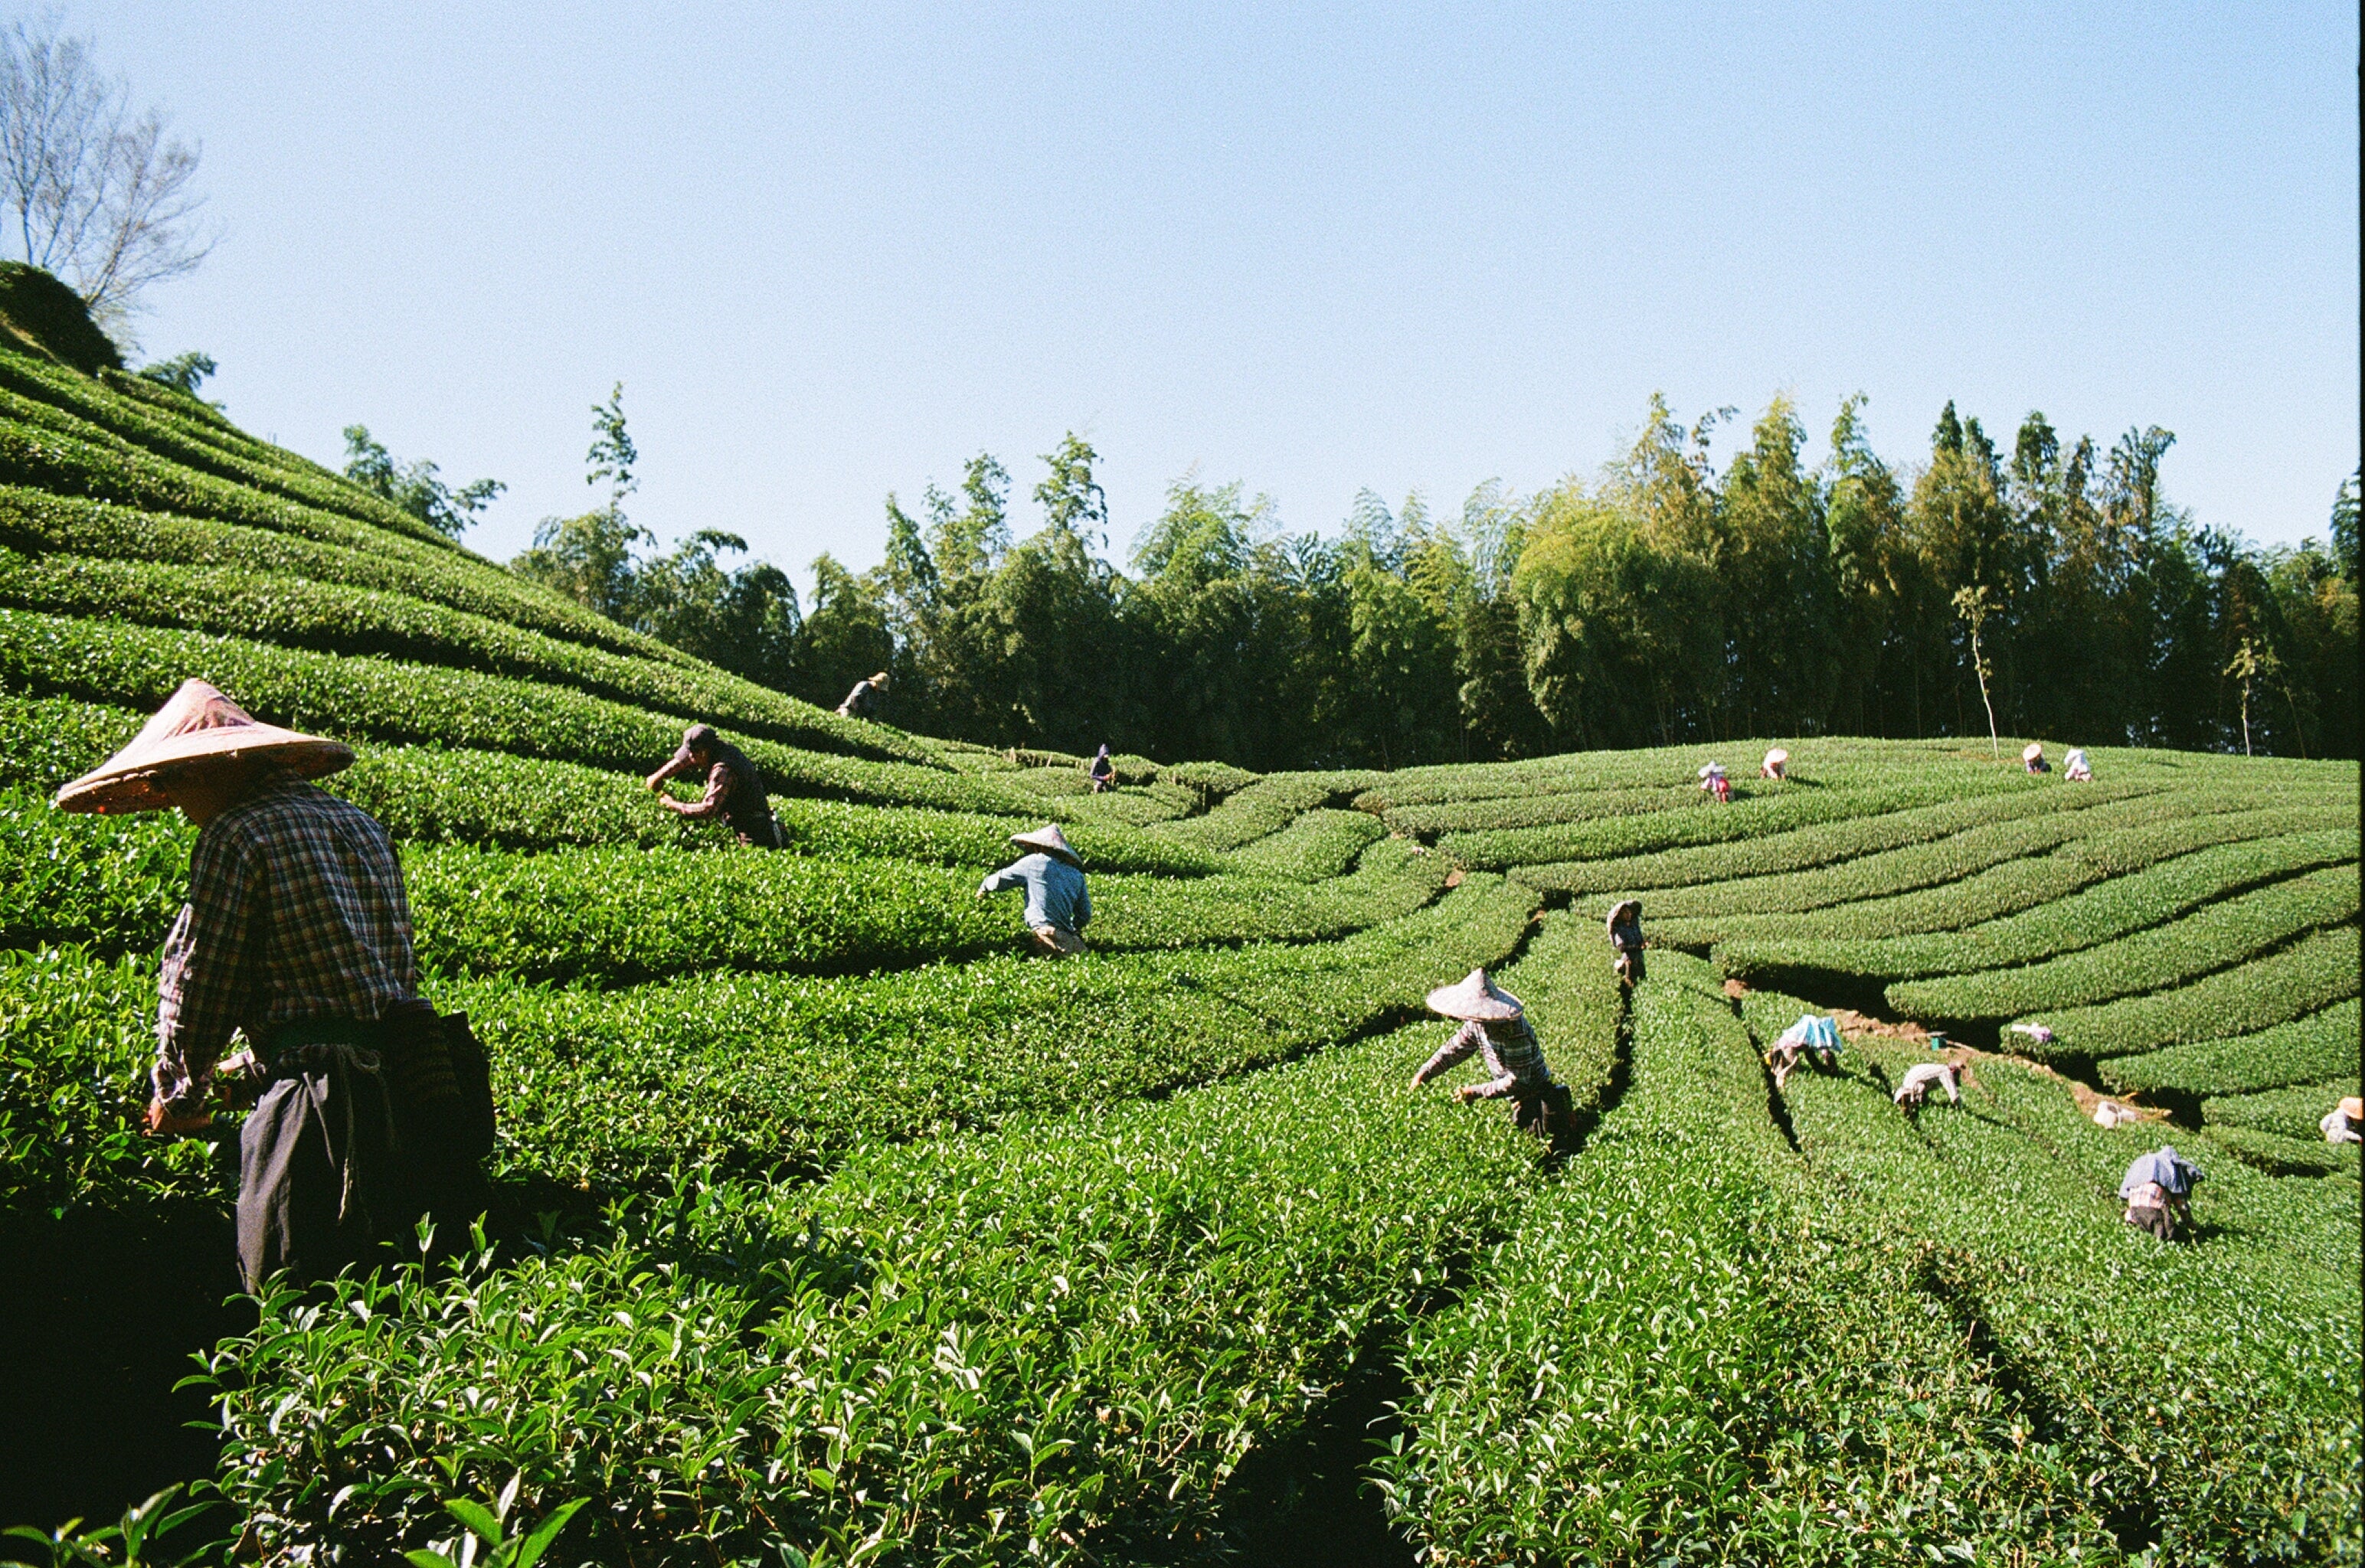 Rolling tea fields in Taiwan. Scattered tea farmers are gathering leaves among the fields. Lush forest in background across a blue sky.